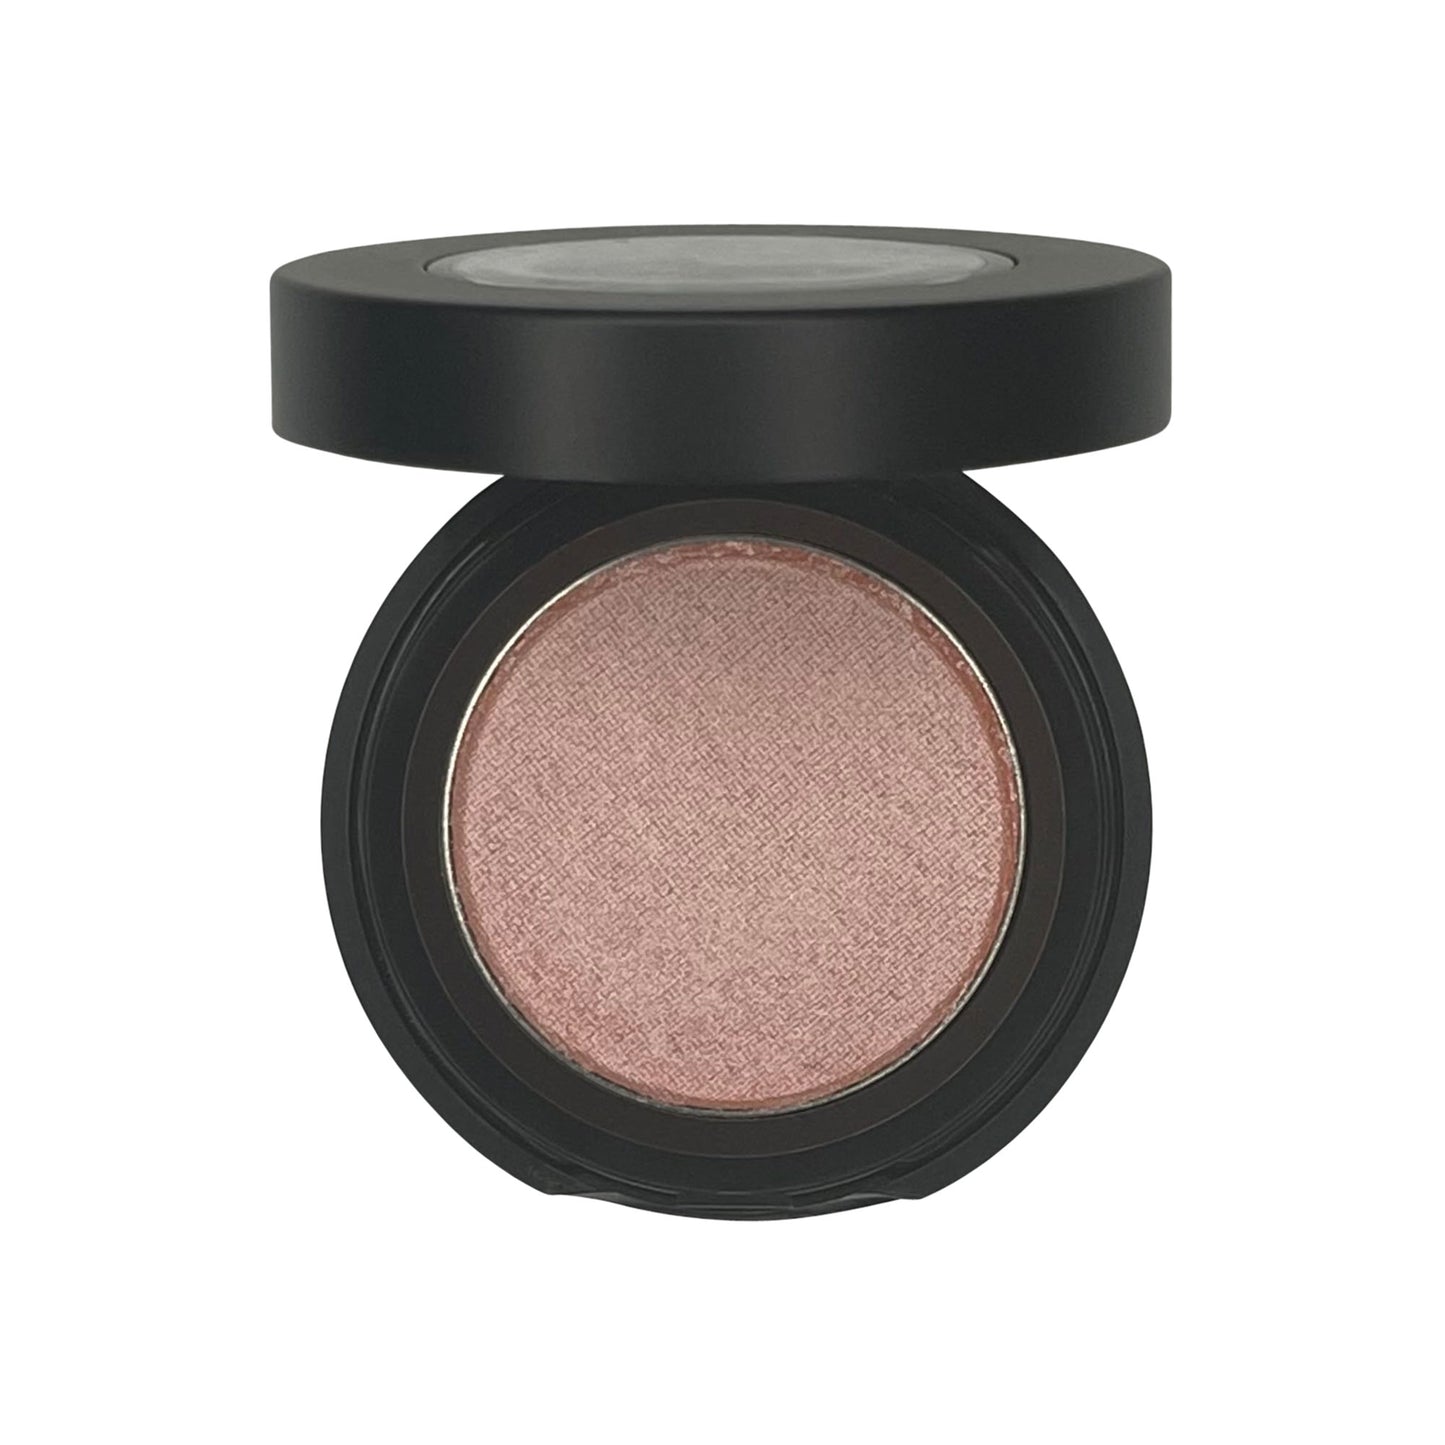 Natural beauty with Cruisin Organics Blossom Single Pan Eyeshadow. As a leader in the industry, this product offers a triple-milled formula in a gorgeous shade with SPF. Feel confident and BeYouTiful with just one swipe.